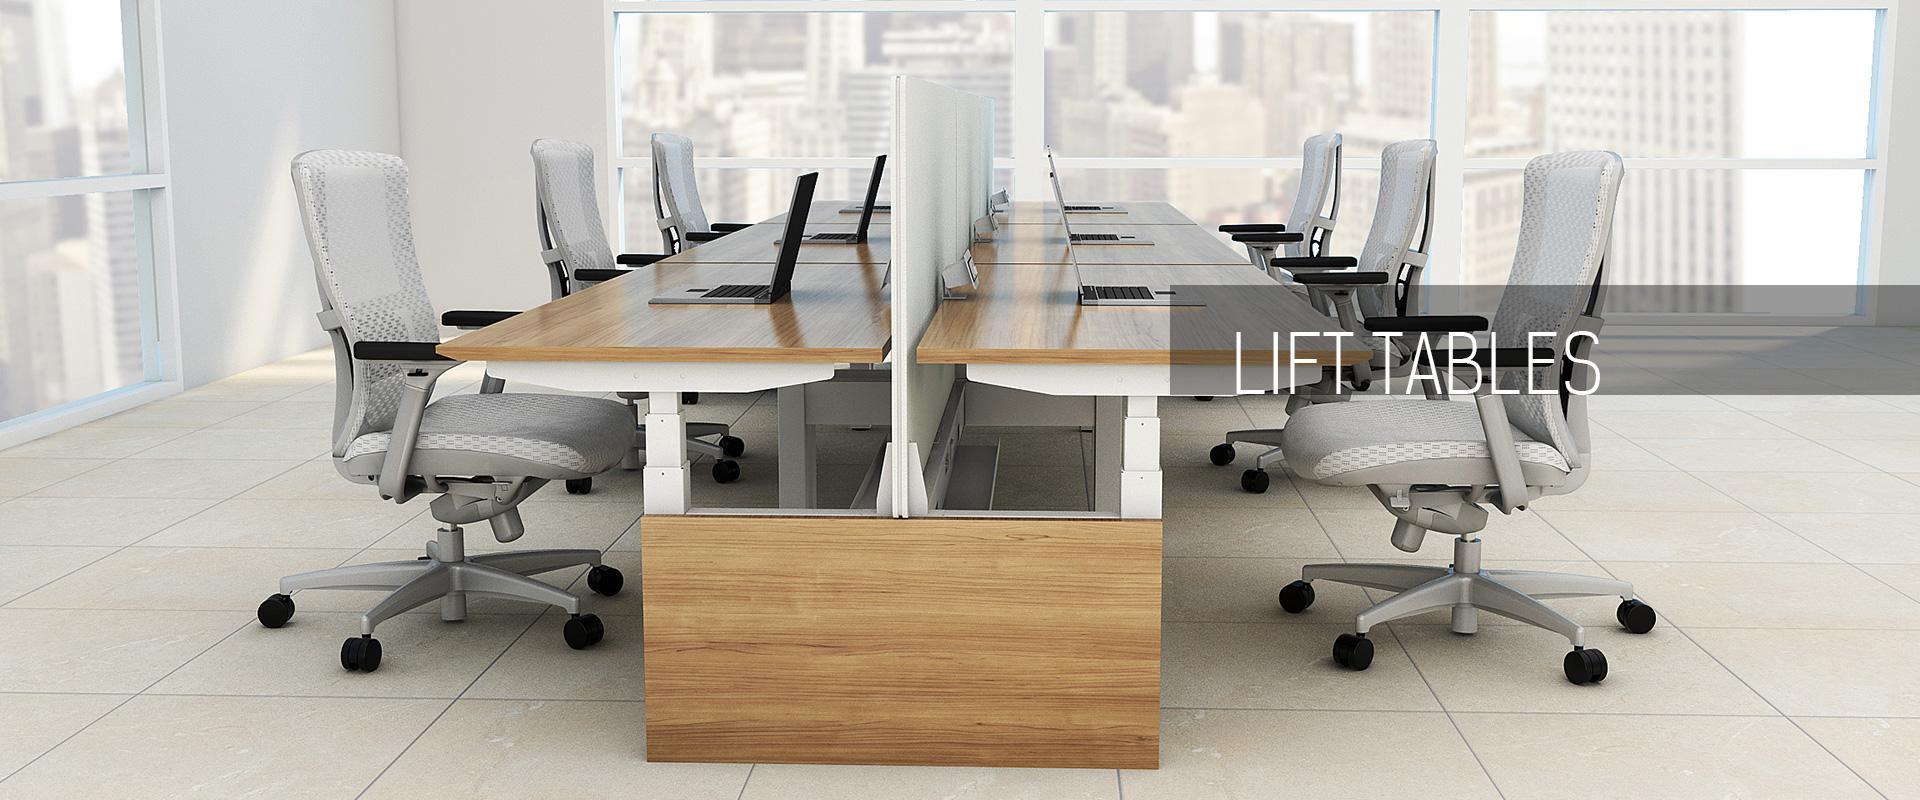 Electric desks benching for multiple employees